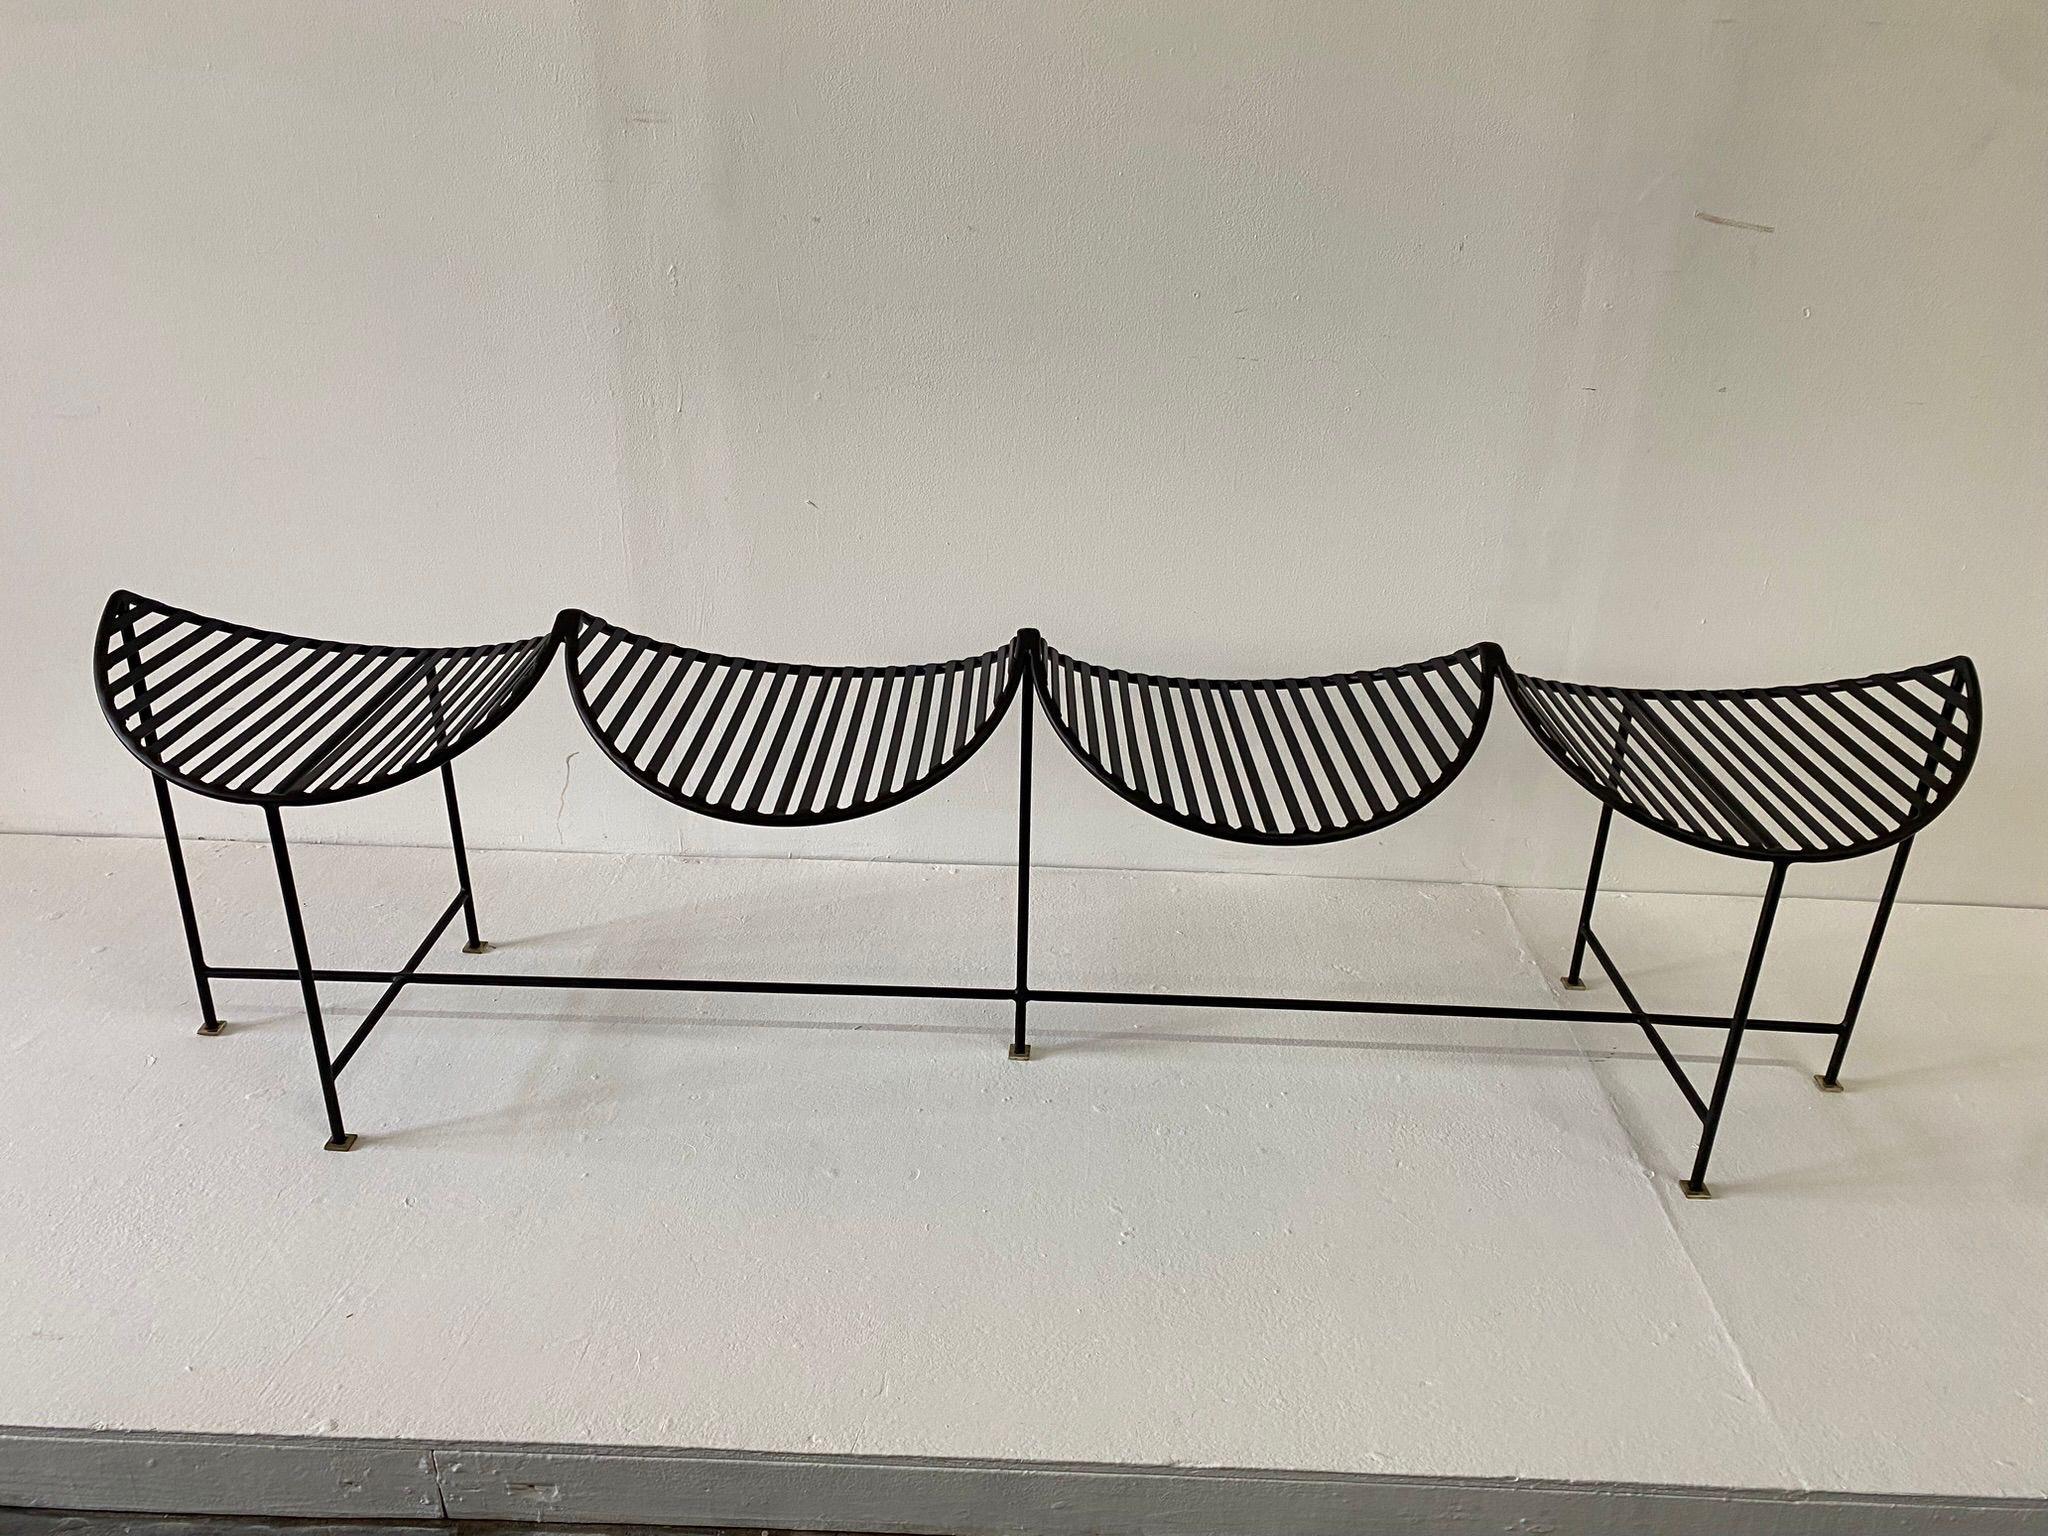 Iron Four-Seat Powder-coated Bench In Good Condition For Sale In East Hampton, NY